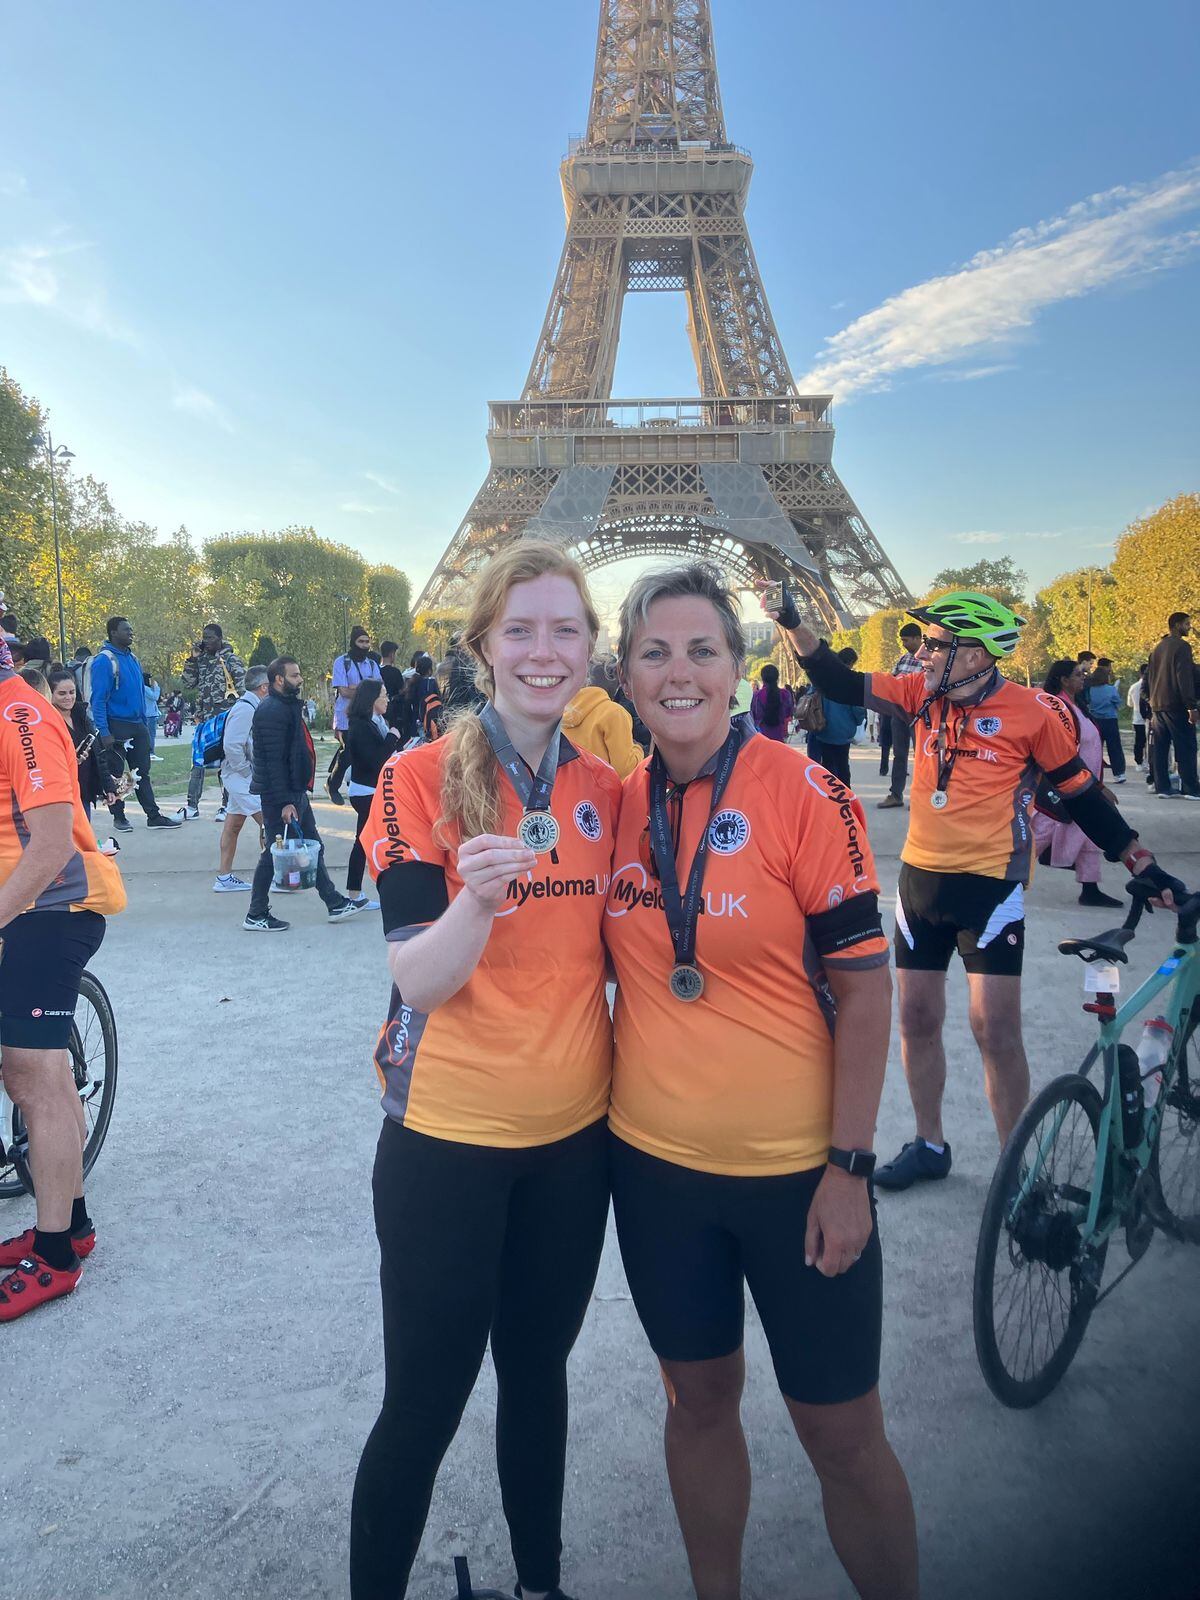 Deb at the finish line, in front of the Eiffel Tower, with her niece and fellow rider Flis O’Toole